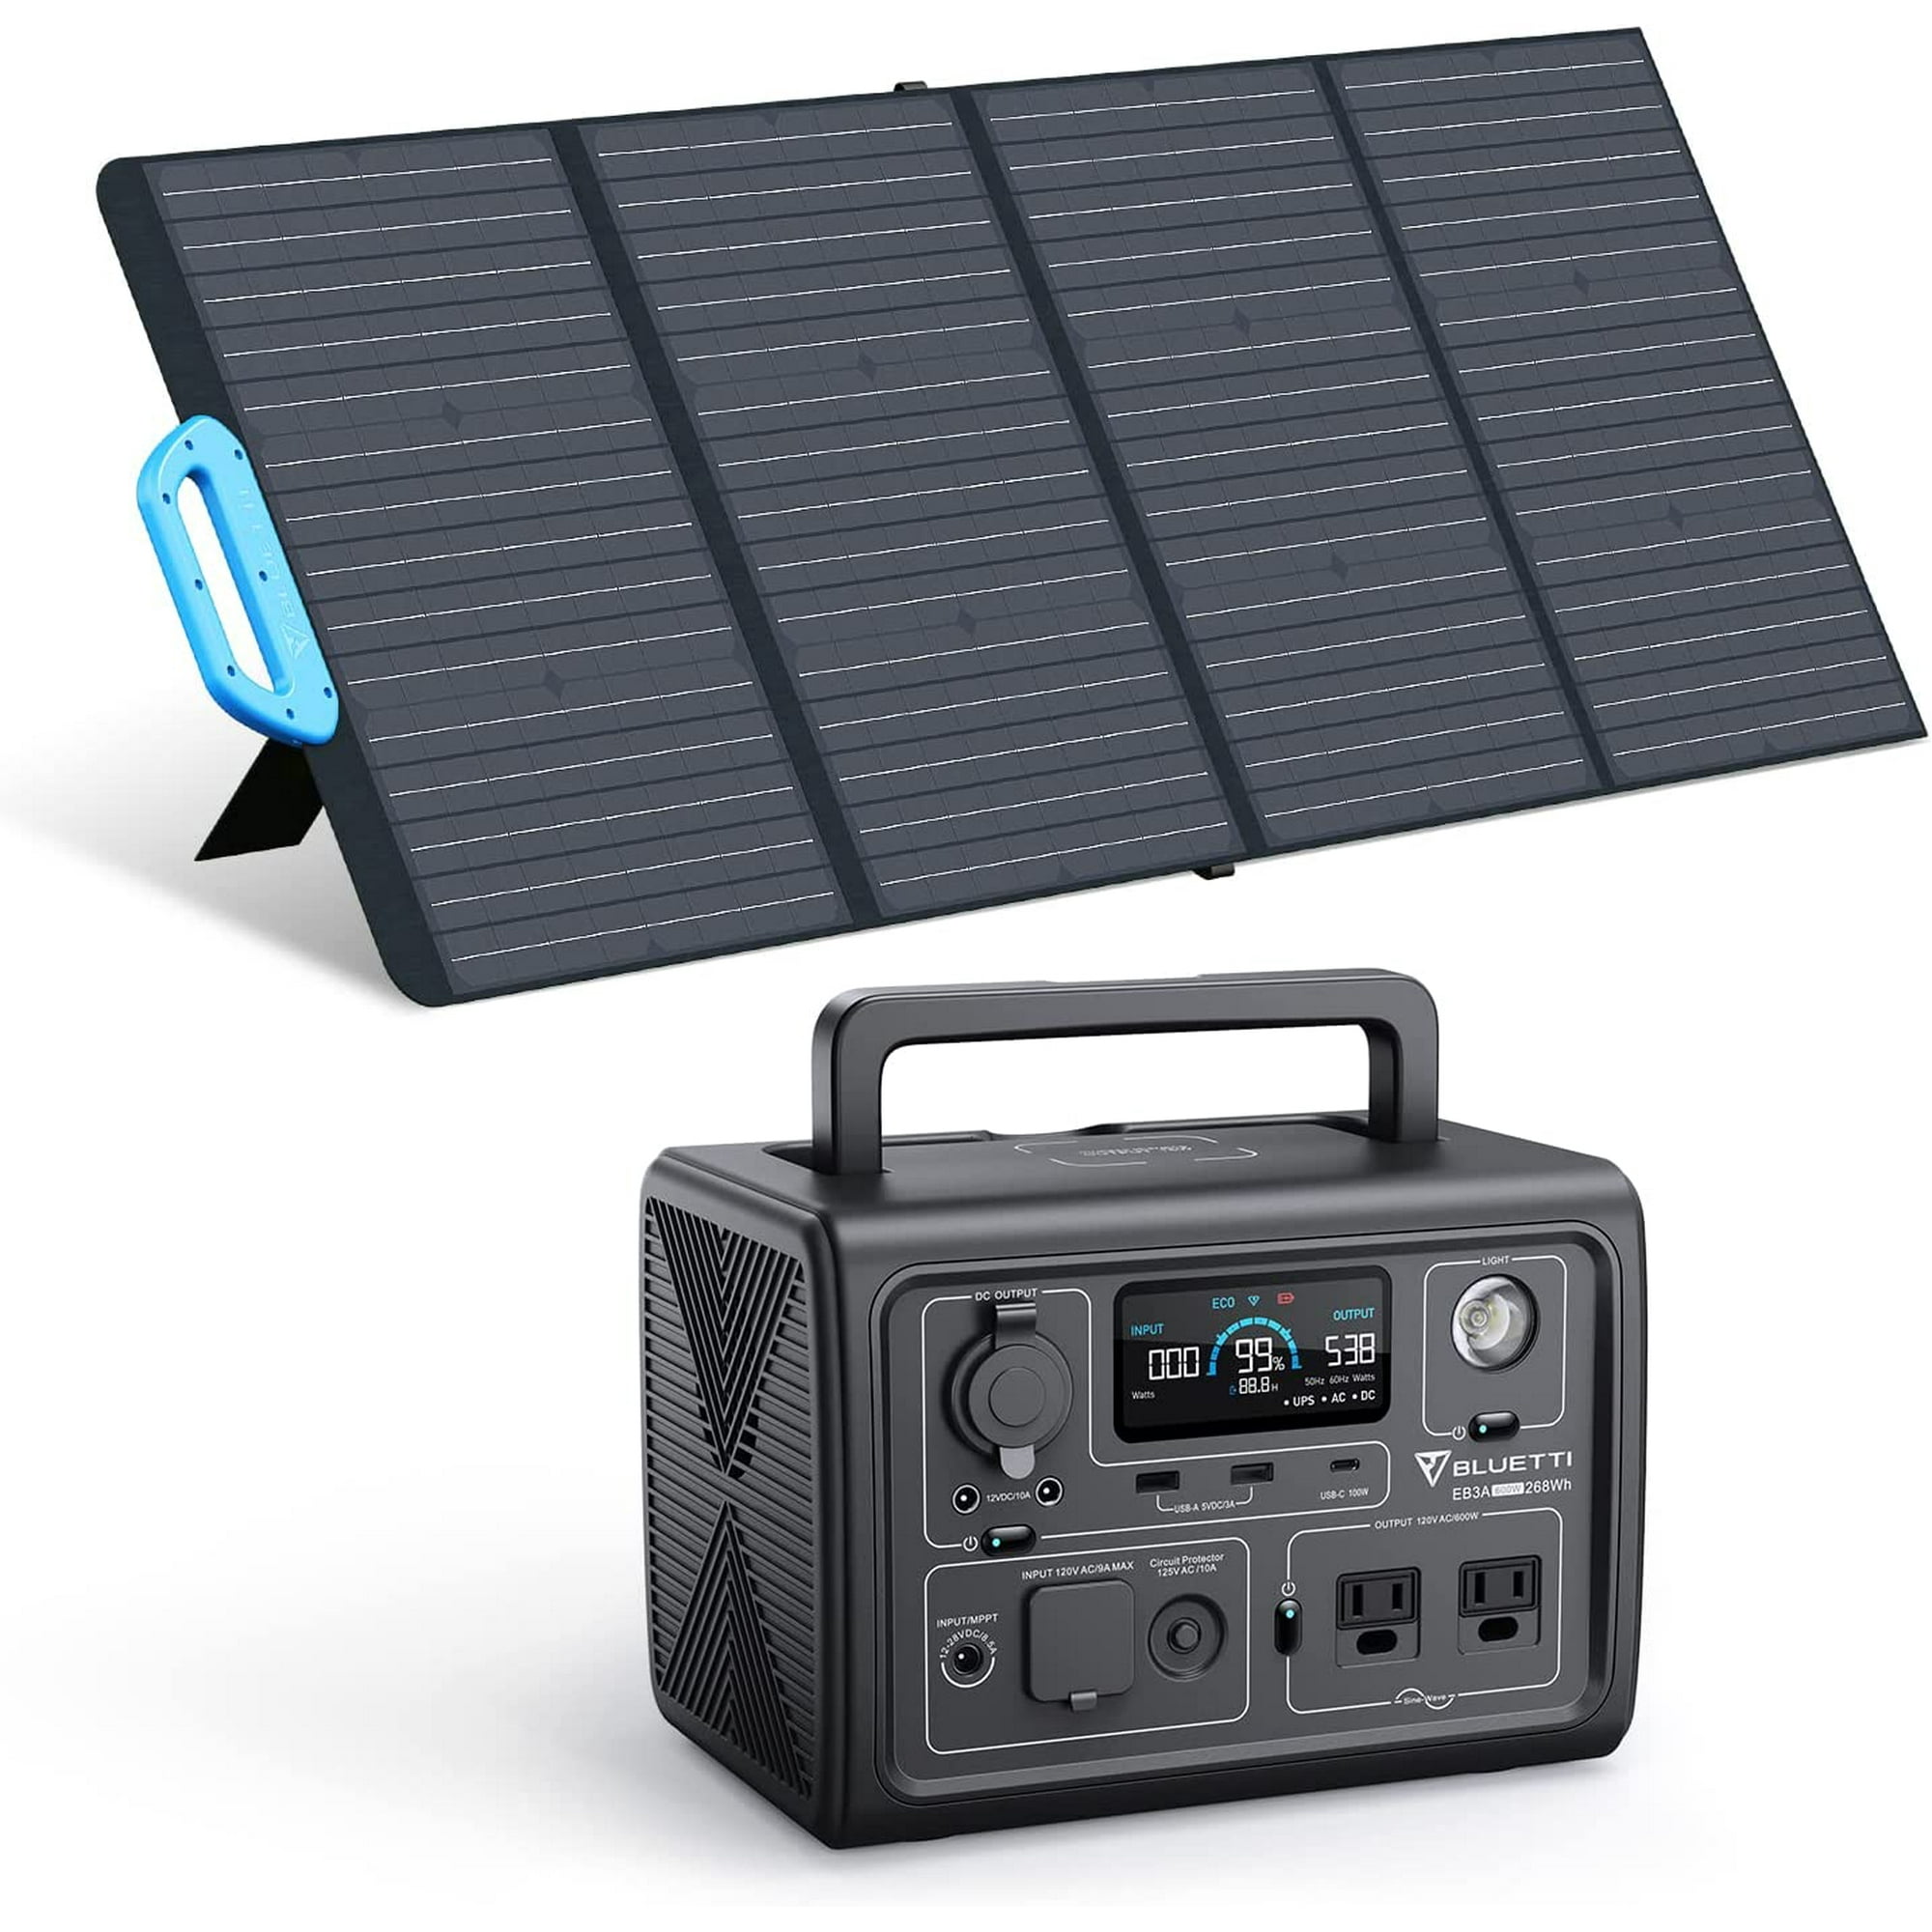 Bluetti EB3A Portable Solar Generator 268Wh Capacity With 120W Solar Panel,  Power Station,600W AC Output for Outdoor Camping, Trip, Power Outage